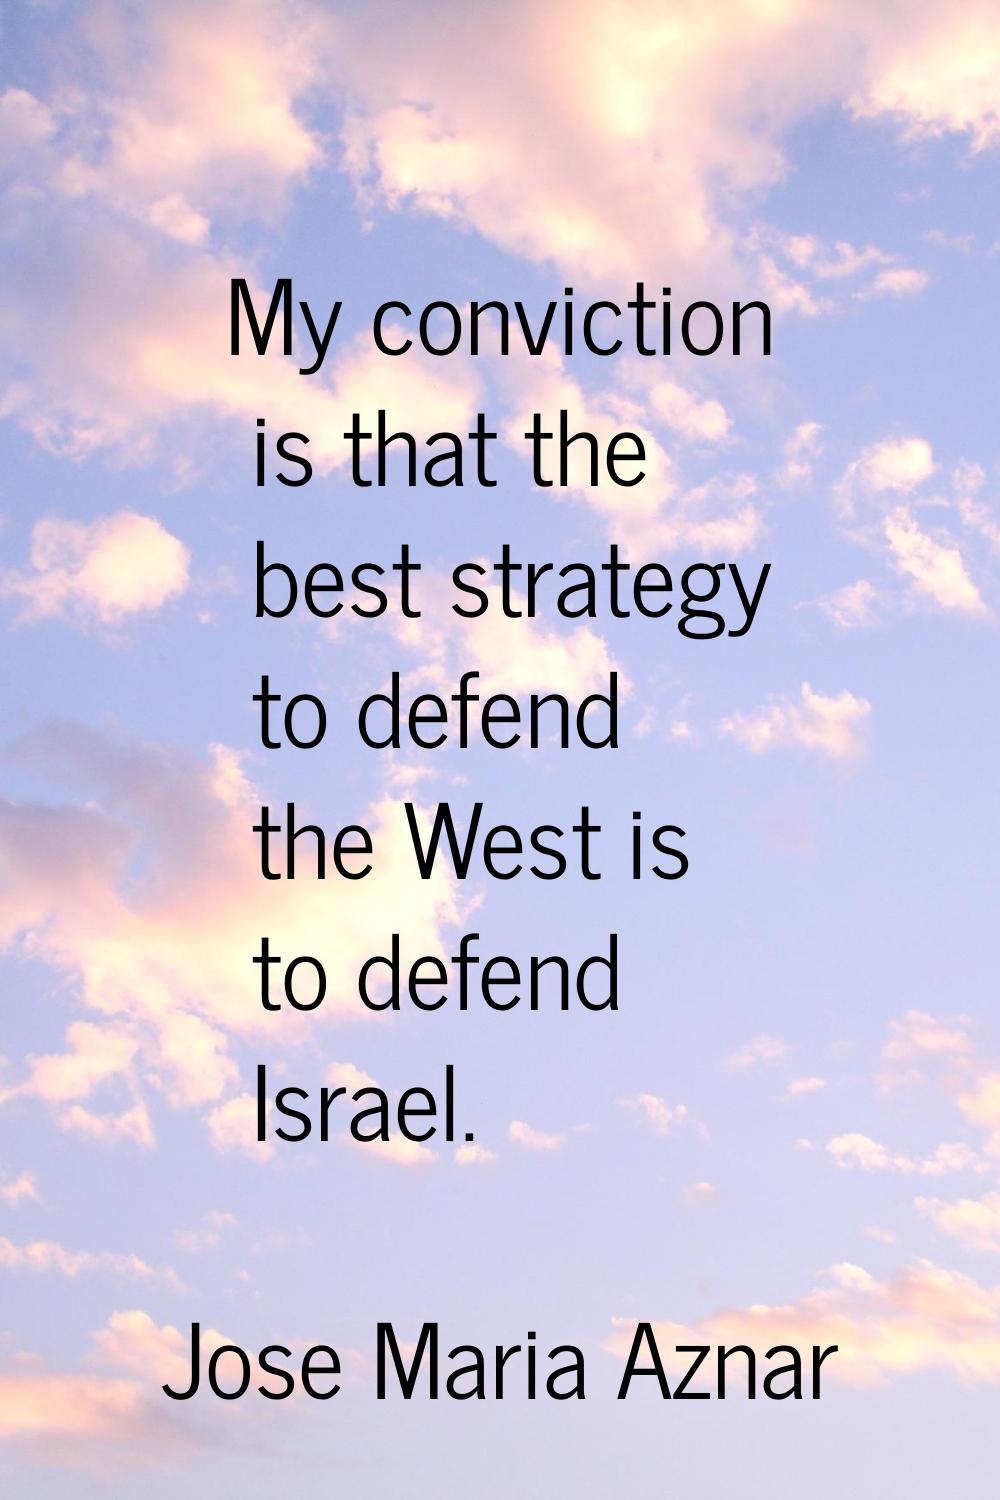 My conviction is that the best strategy to defend the West is to defend Israel.